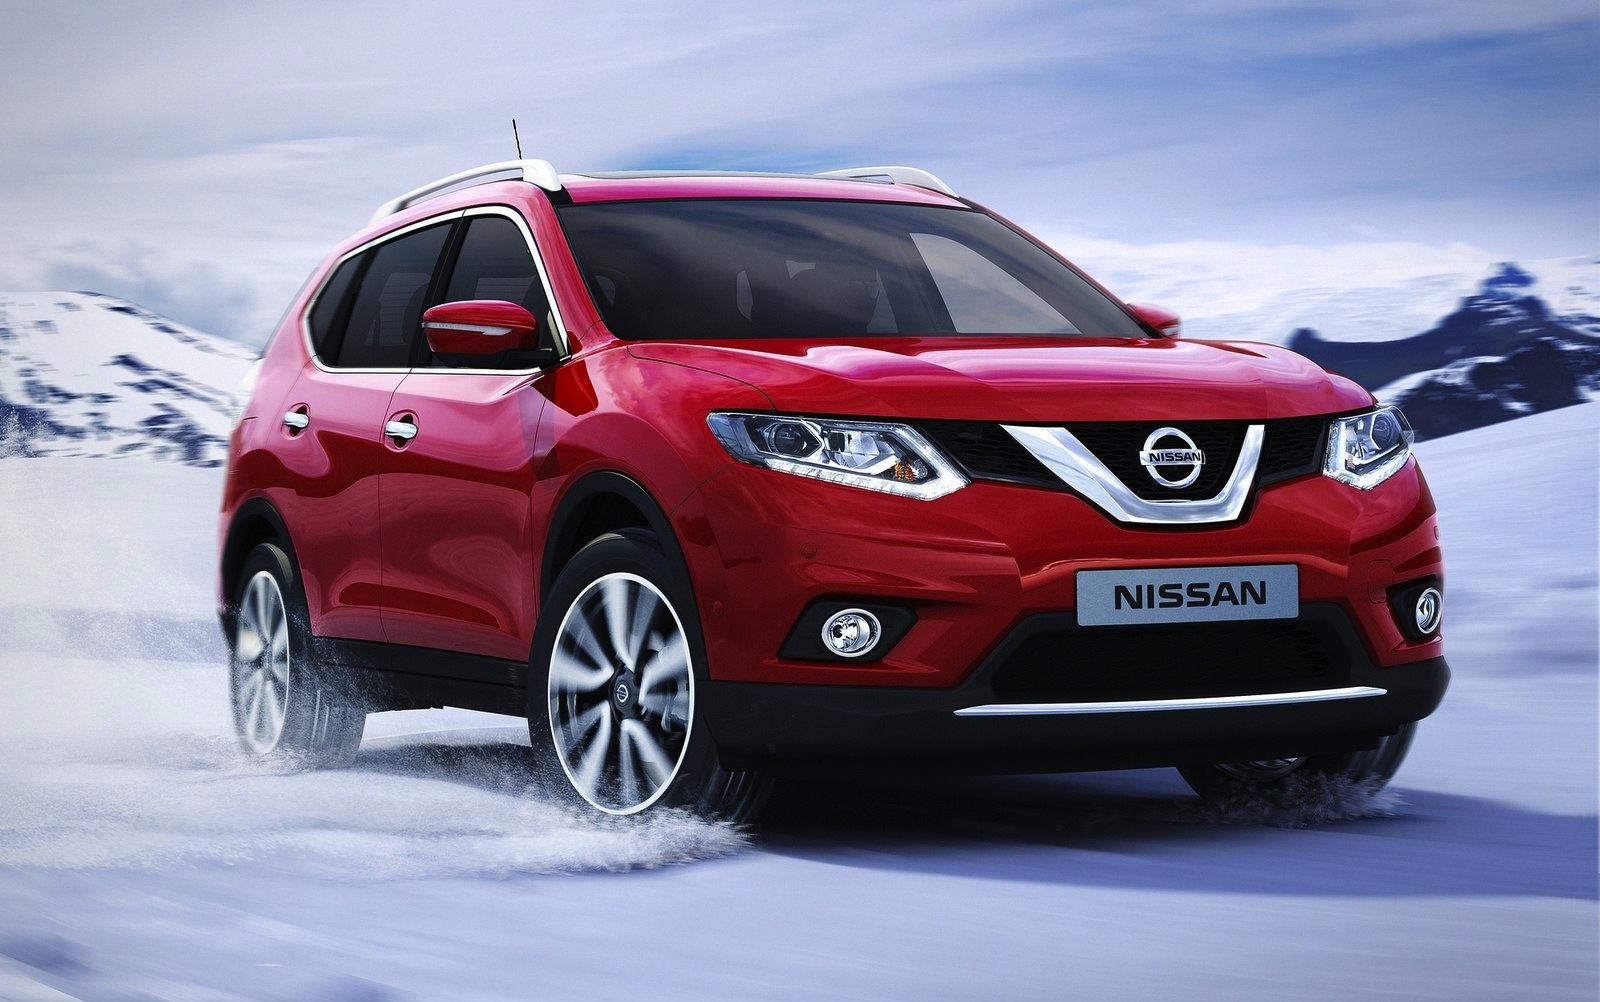 2014 Nissan XTrail softer styling and seven seats for